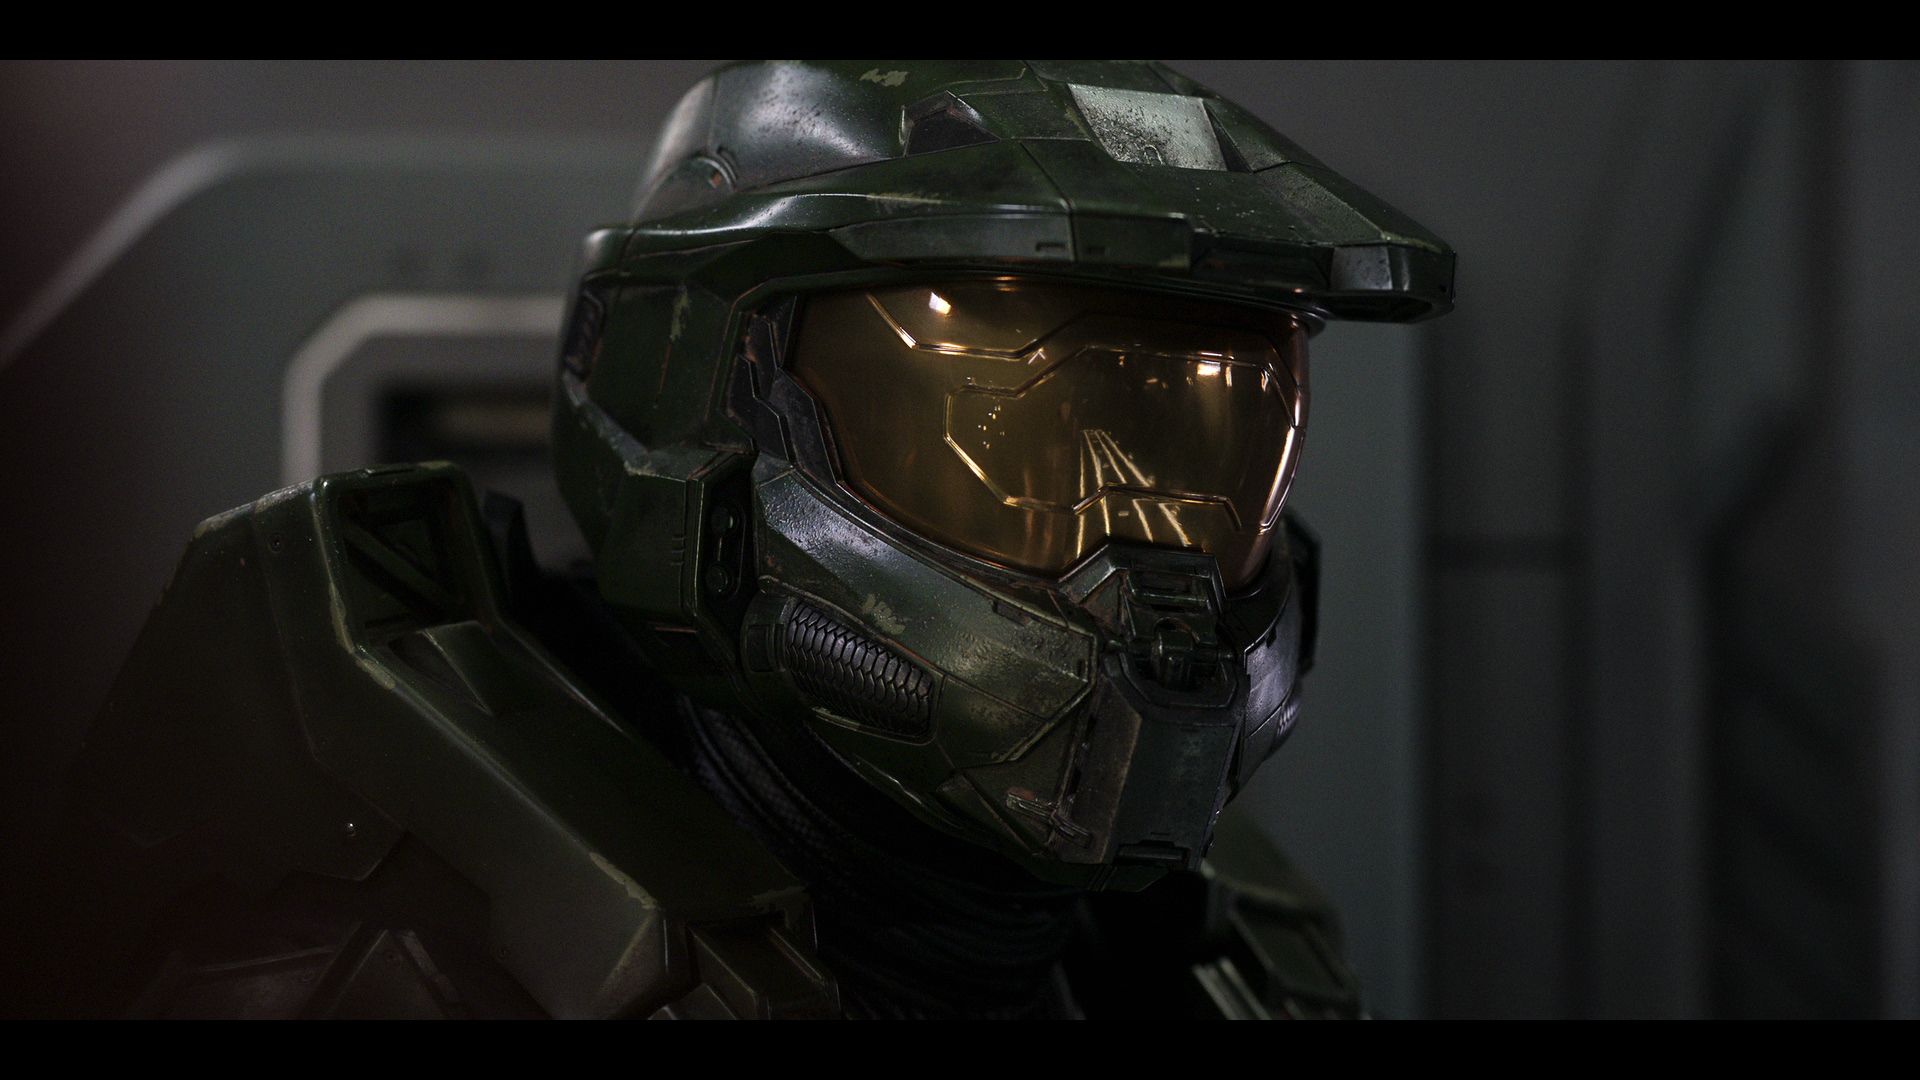 Halo TV Series (Official Site) Watch on Paramount Plus